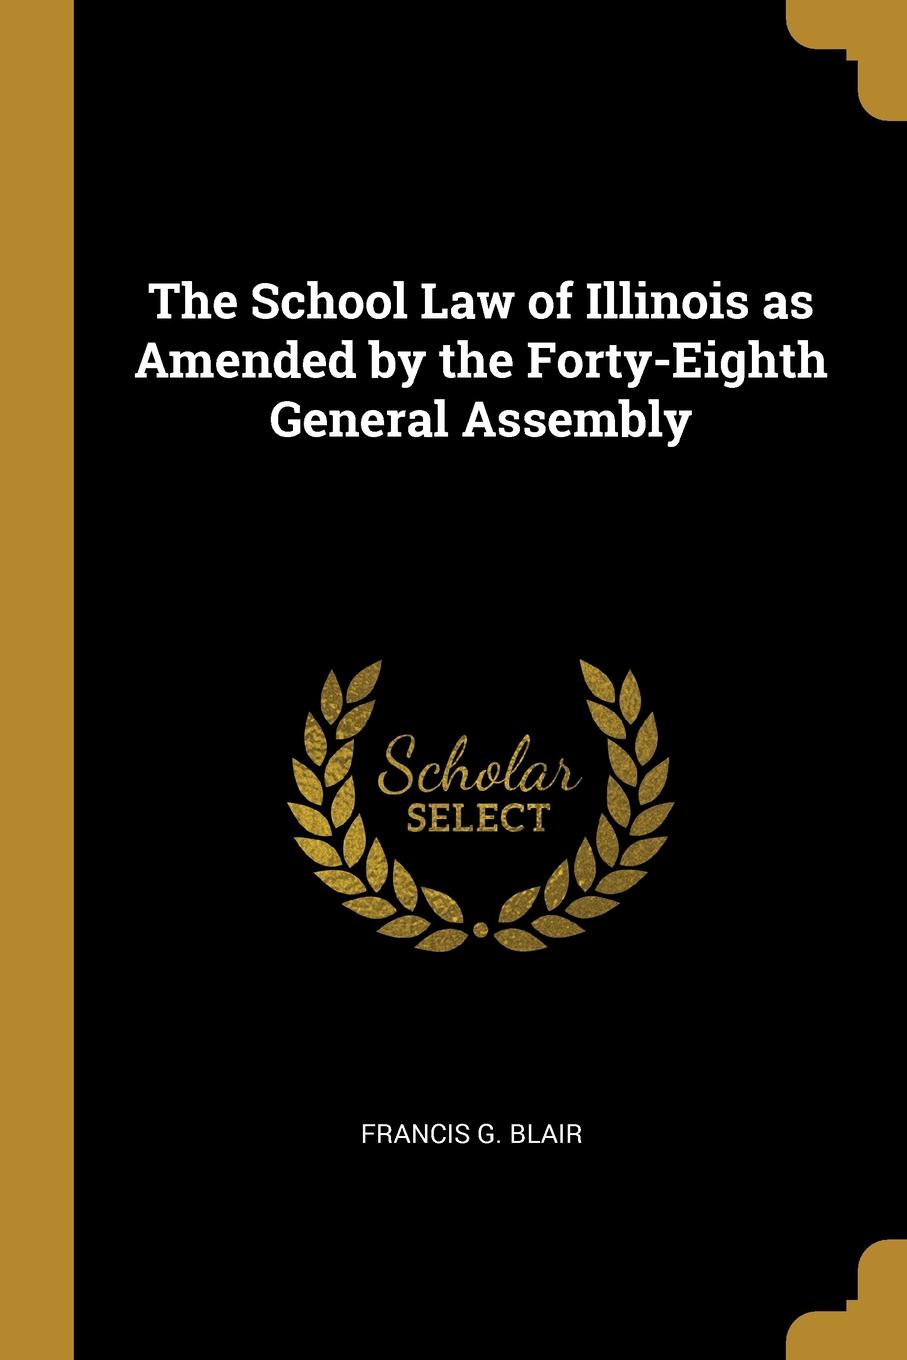 фото The School Law of Illinois as Amended by the Forty-Eighth General Assembly